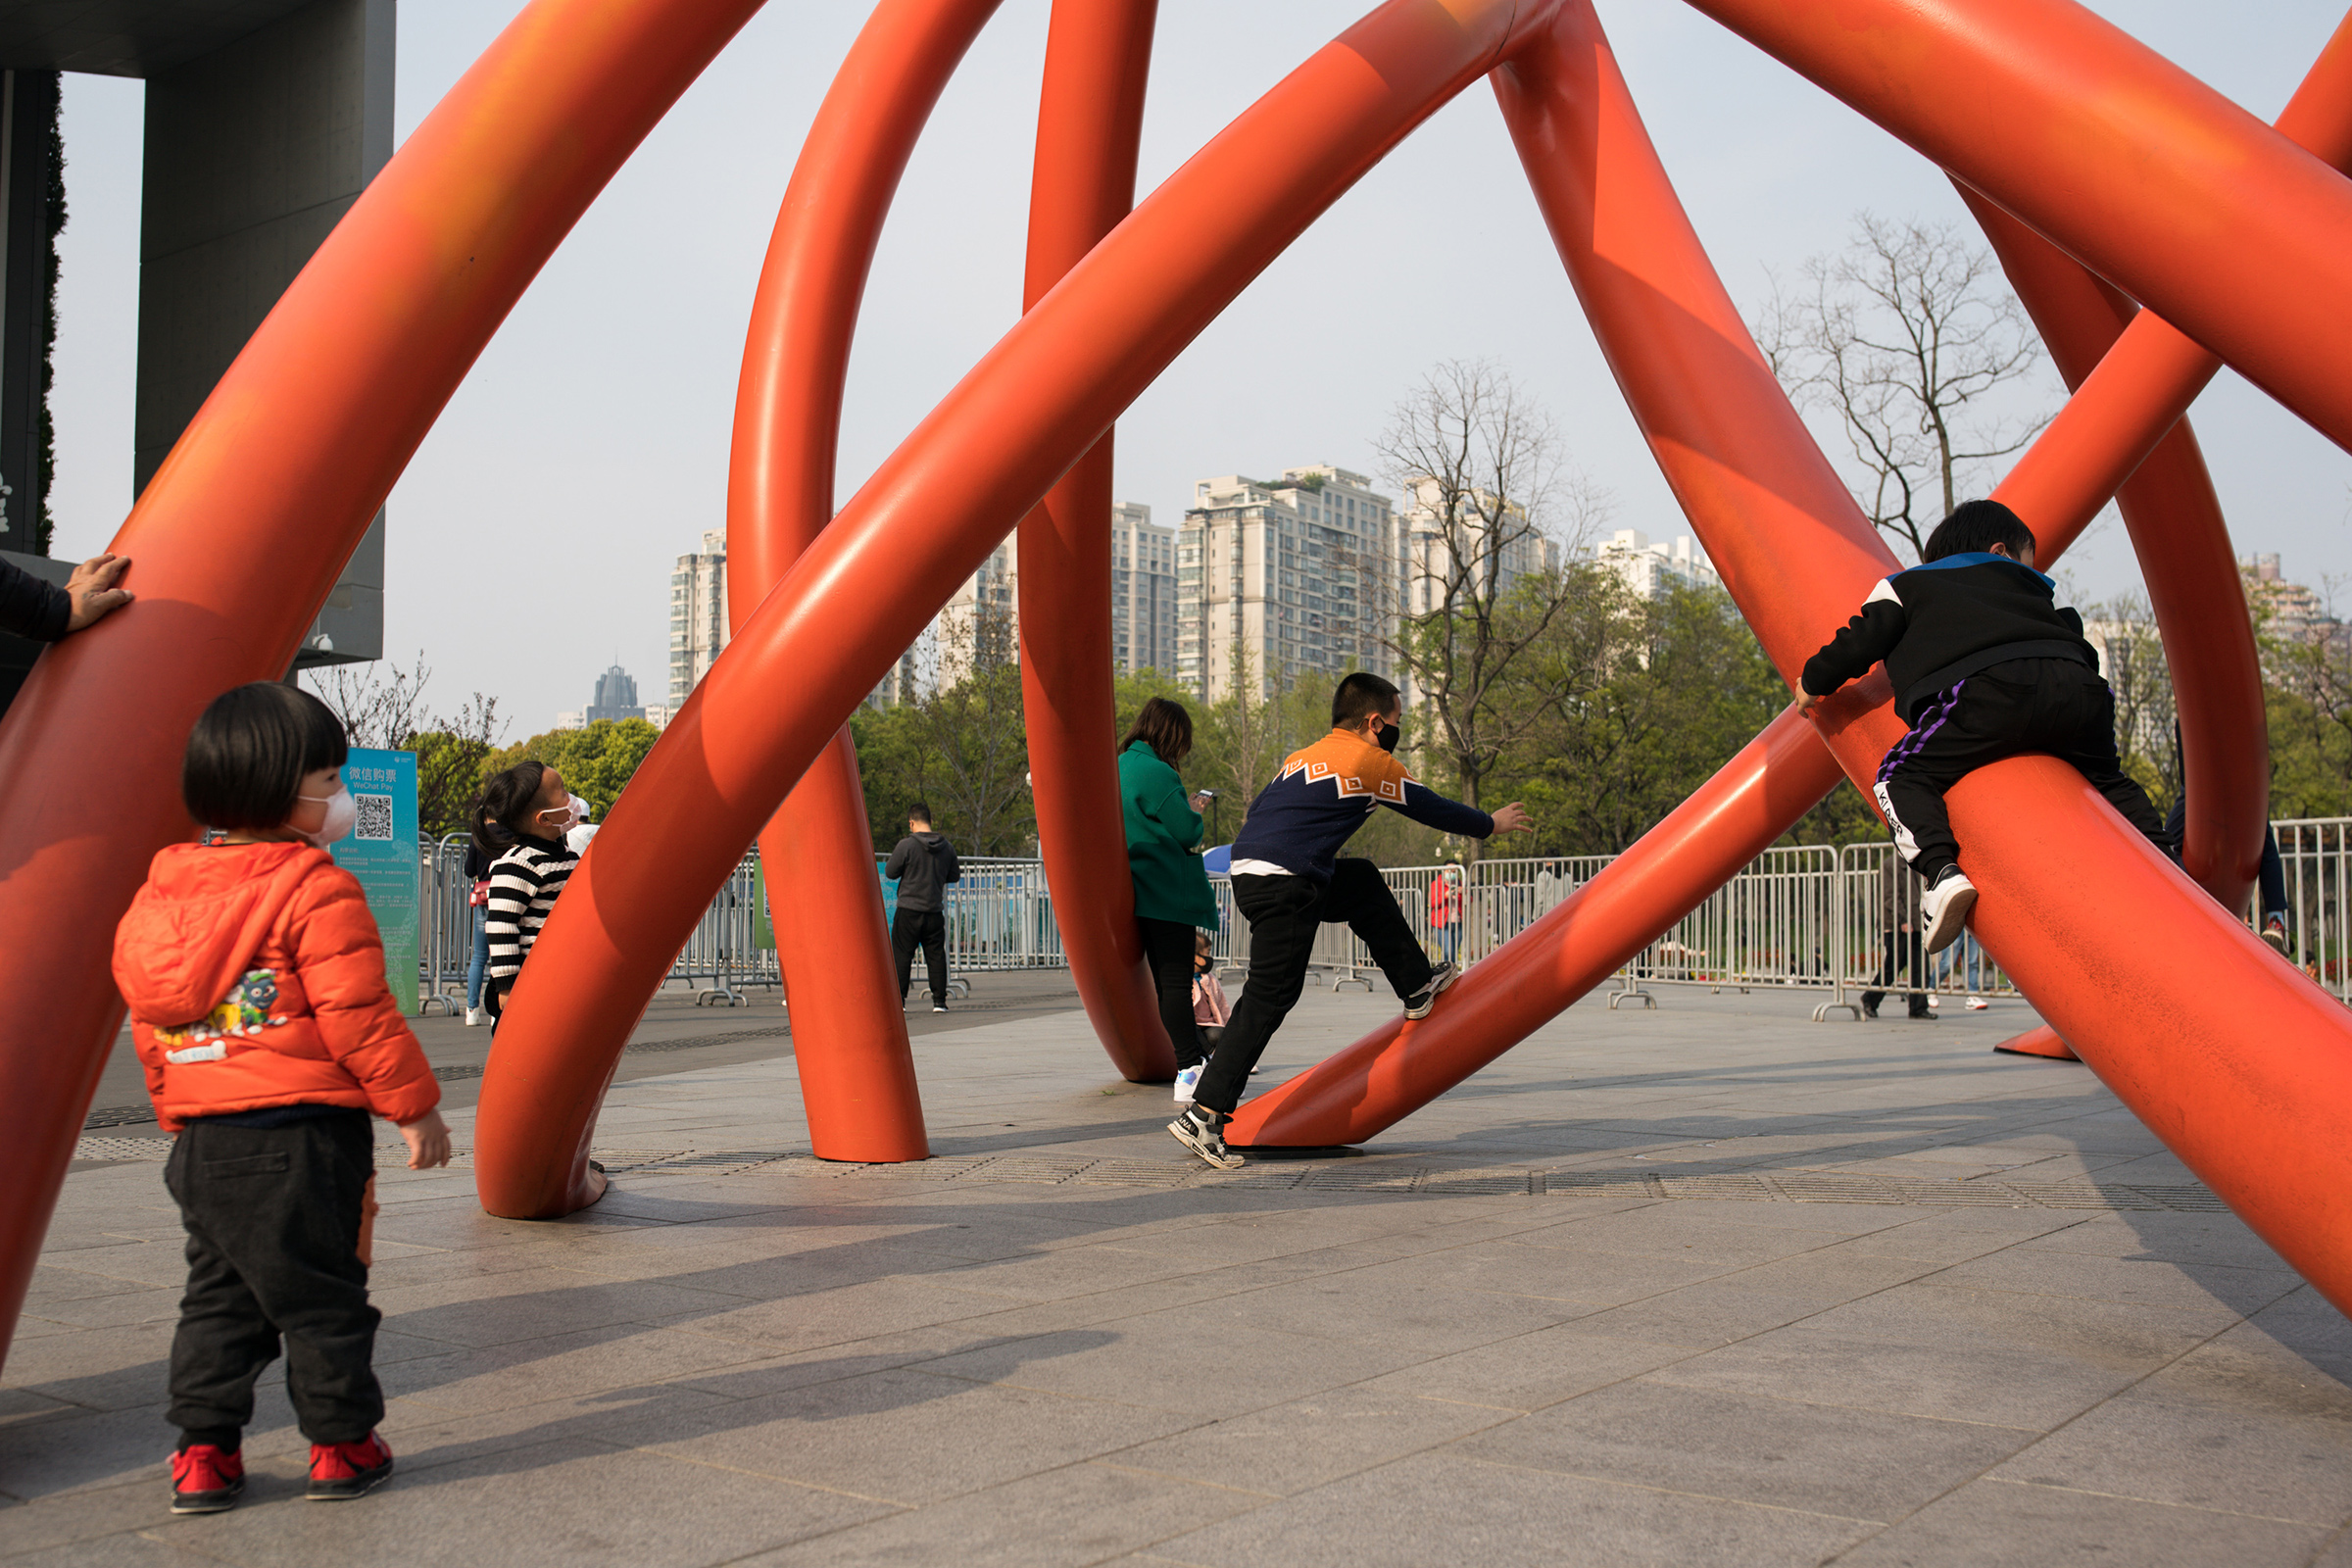 Children wear protective masks while playing under a sculpture in a city park on April 01, in Shanghai, China (Yves Dean—Getty Images)